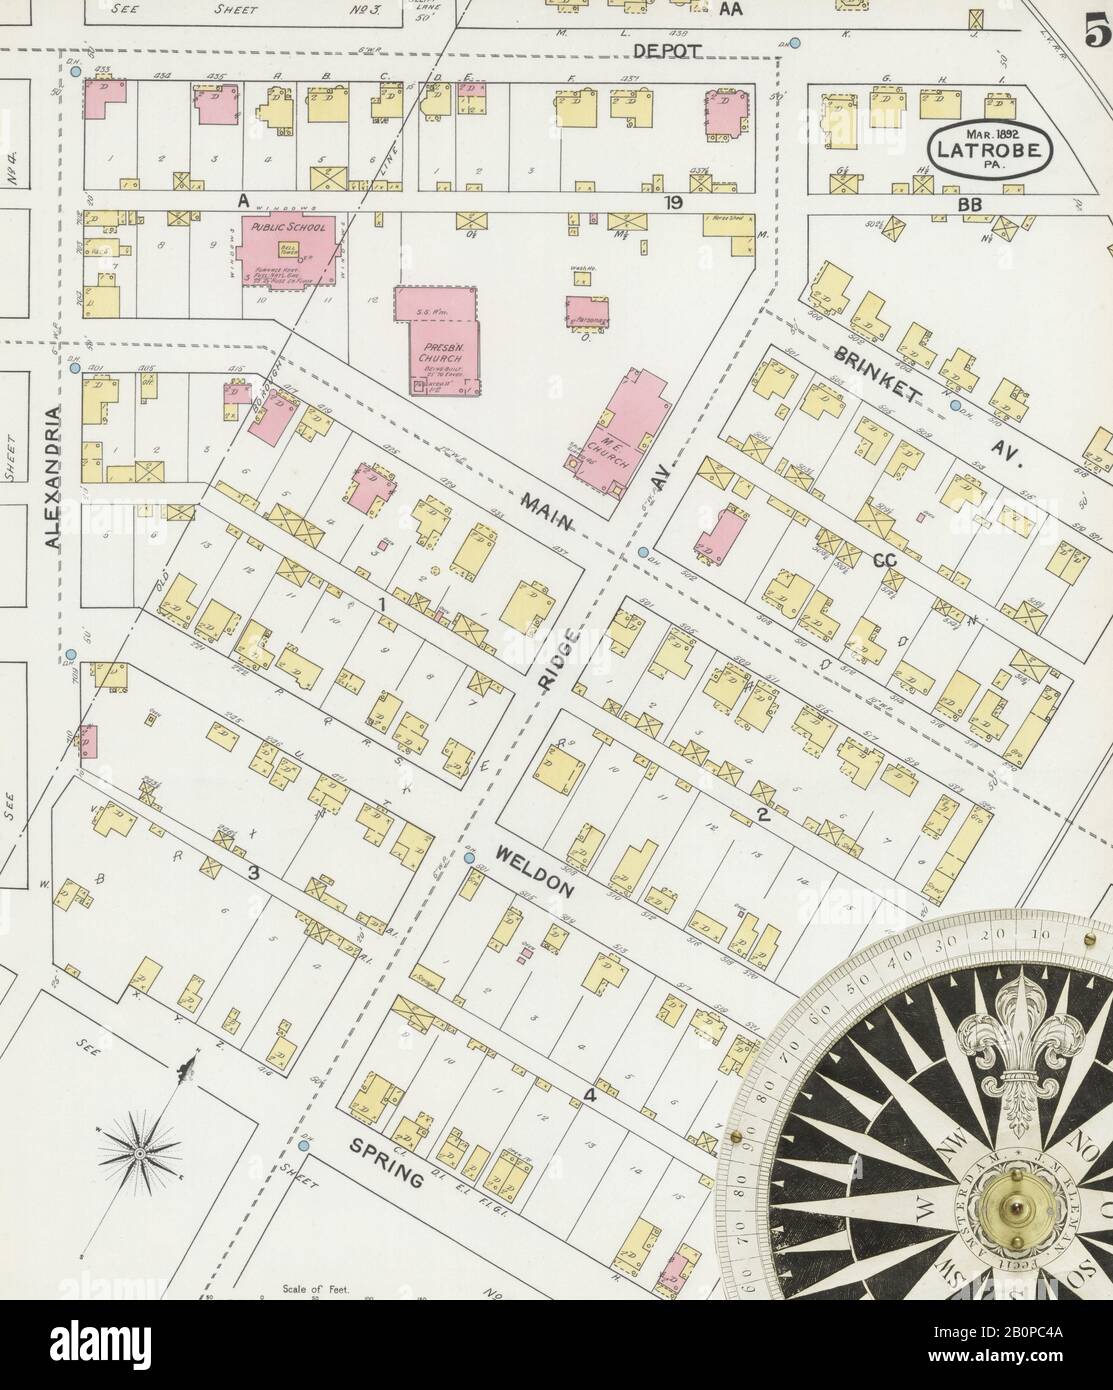 Image 5 of Sanborn Fire Insurance Map from Latrobe, Westmoreland County, Pennsylvania. Mar 1892. 11 Sheet(s), America, street map with a Nineteenth Century compass Stock Photo